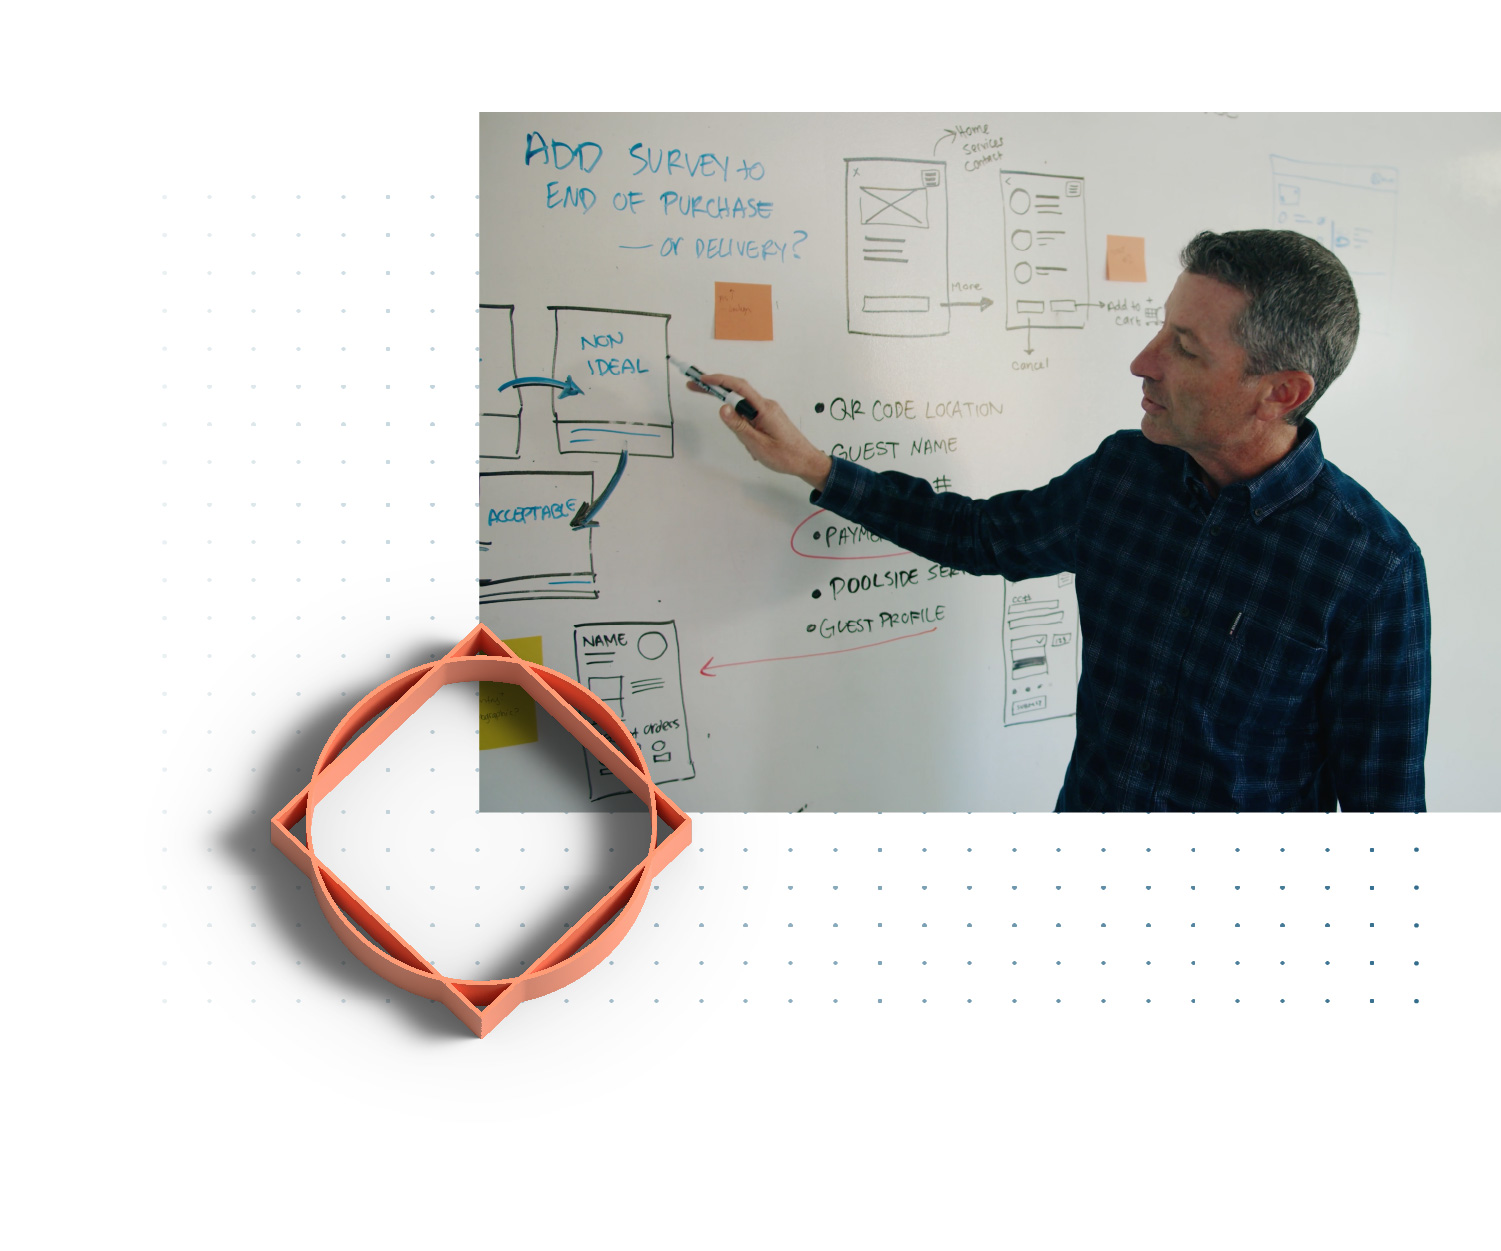 Japheth, our COO, points to some wireframes of a workflow on a whiteboard. 